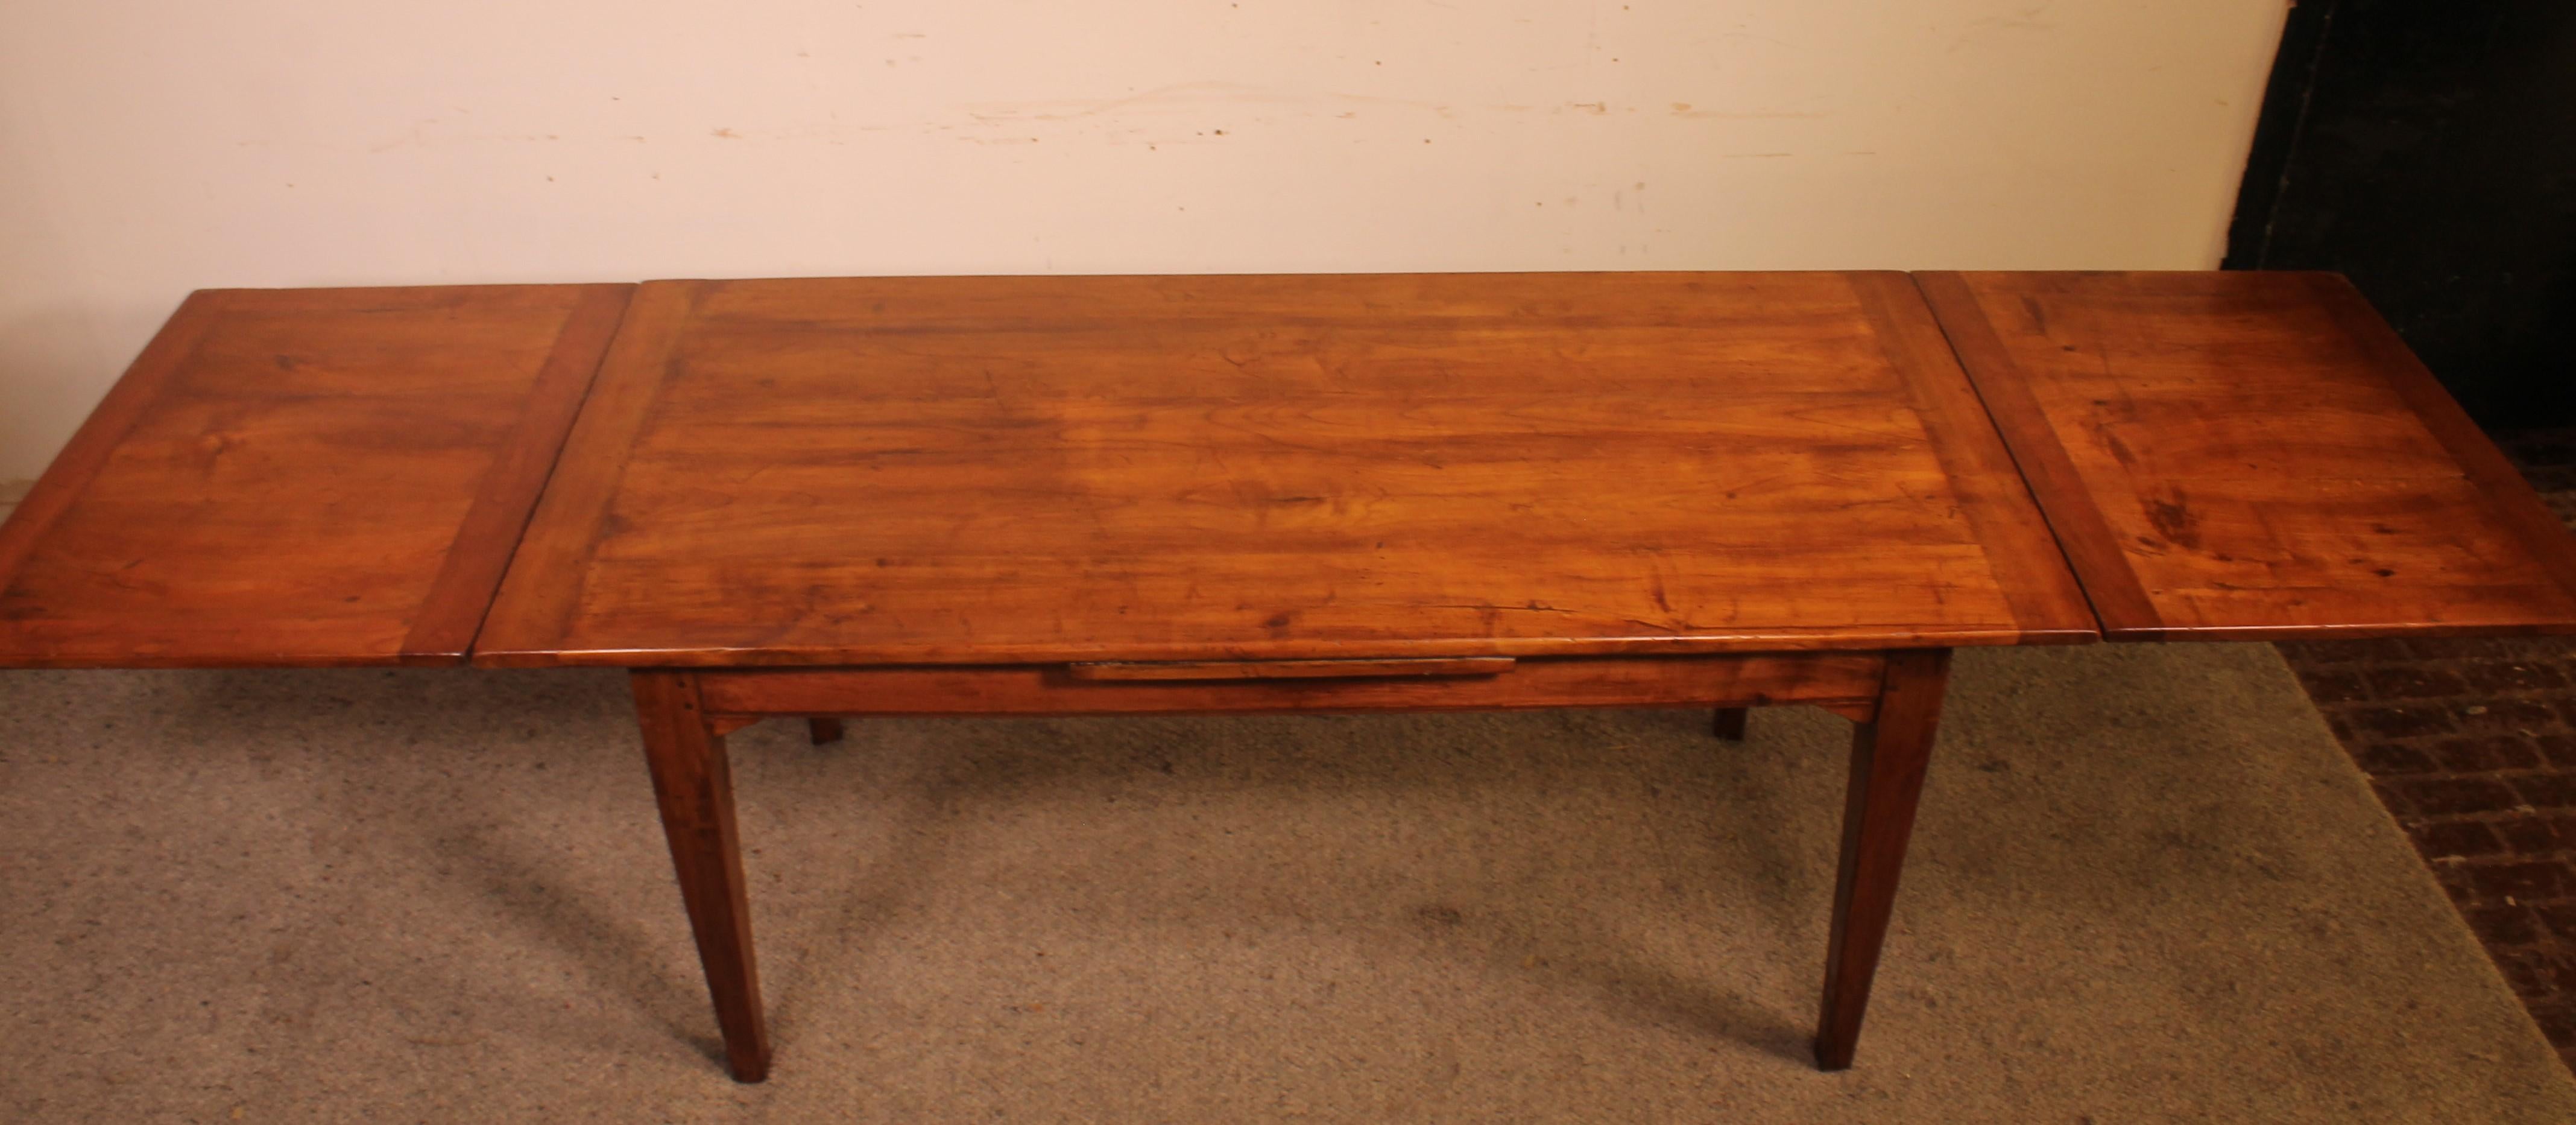 Small Extendable Table in Cherry Wood from the 19th Century In Good Condition For Sale In Brussels, Brussels